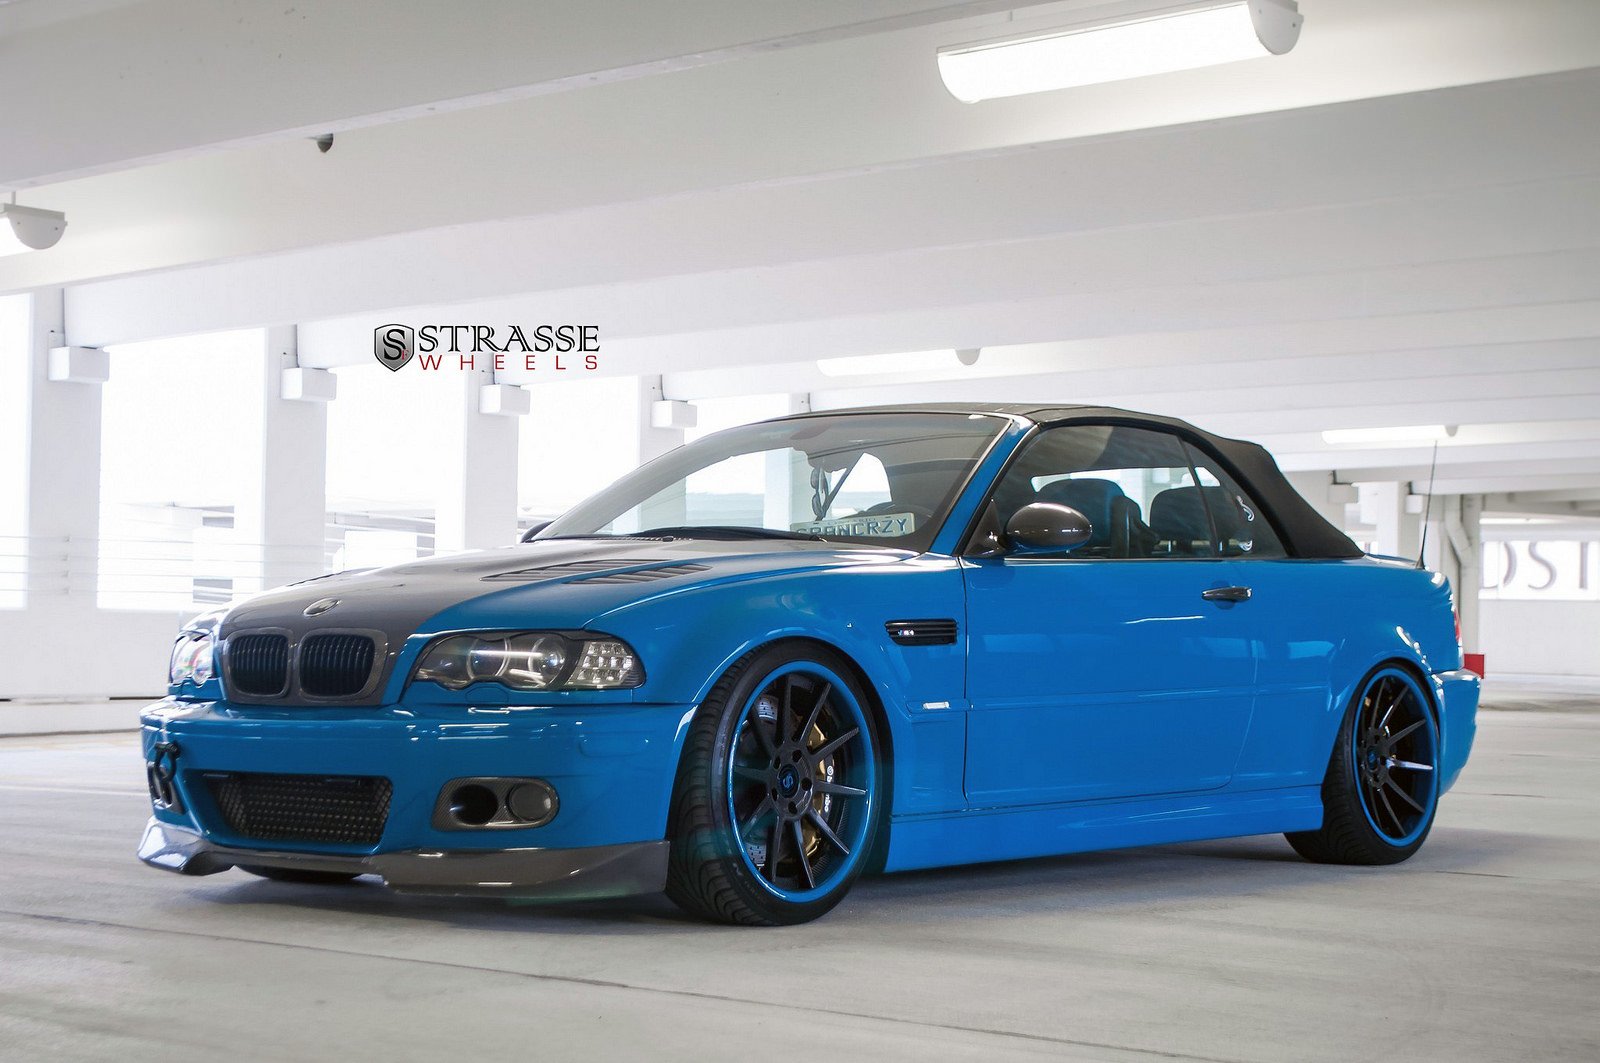 Bmw E46 M3 Convertible Blue Strasse Tuning Wheels Wallpapers Hd Desktop And Mobile Backgrounds